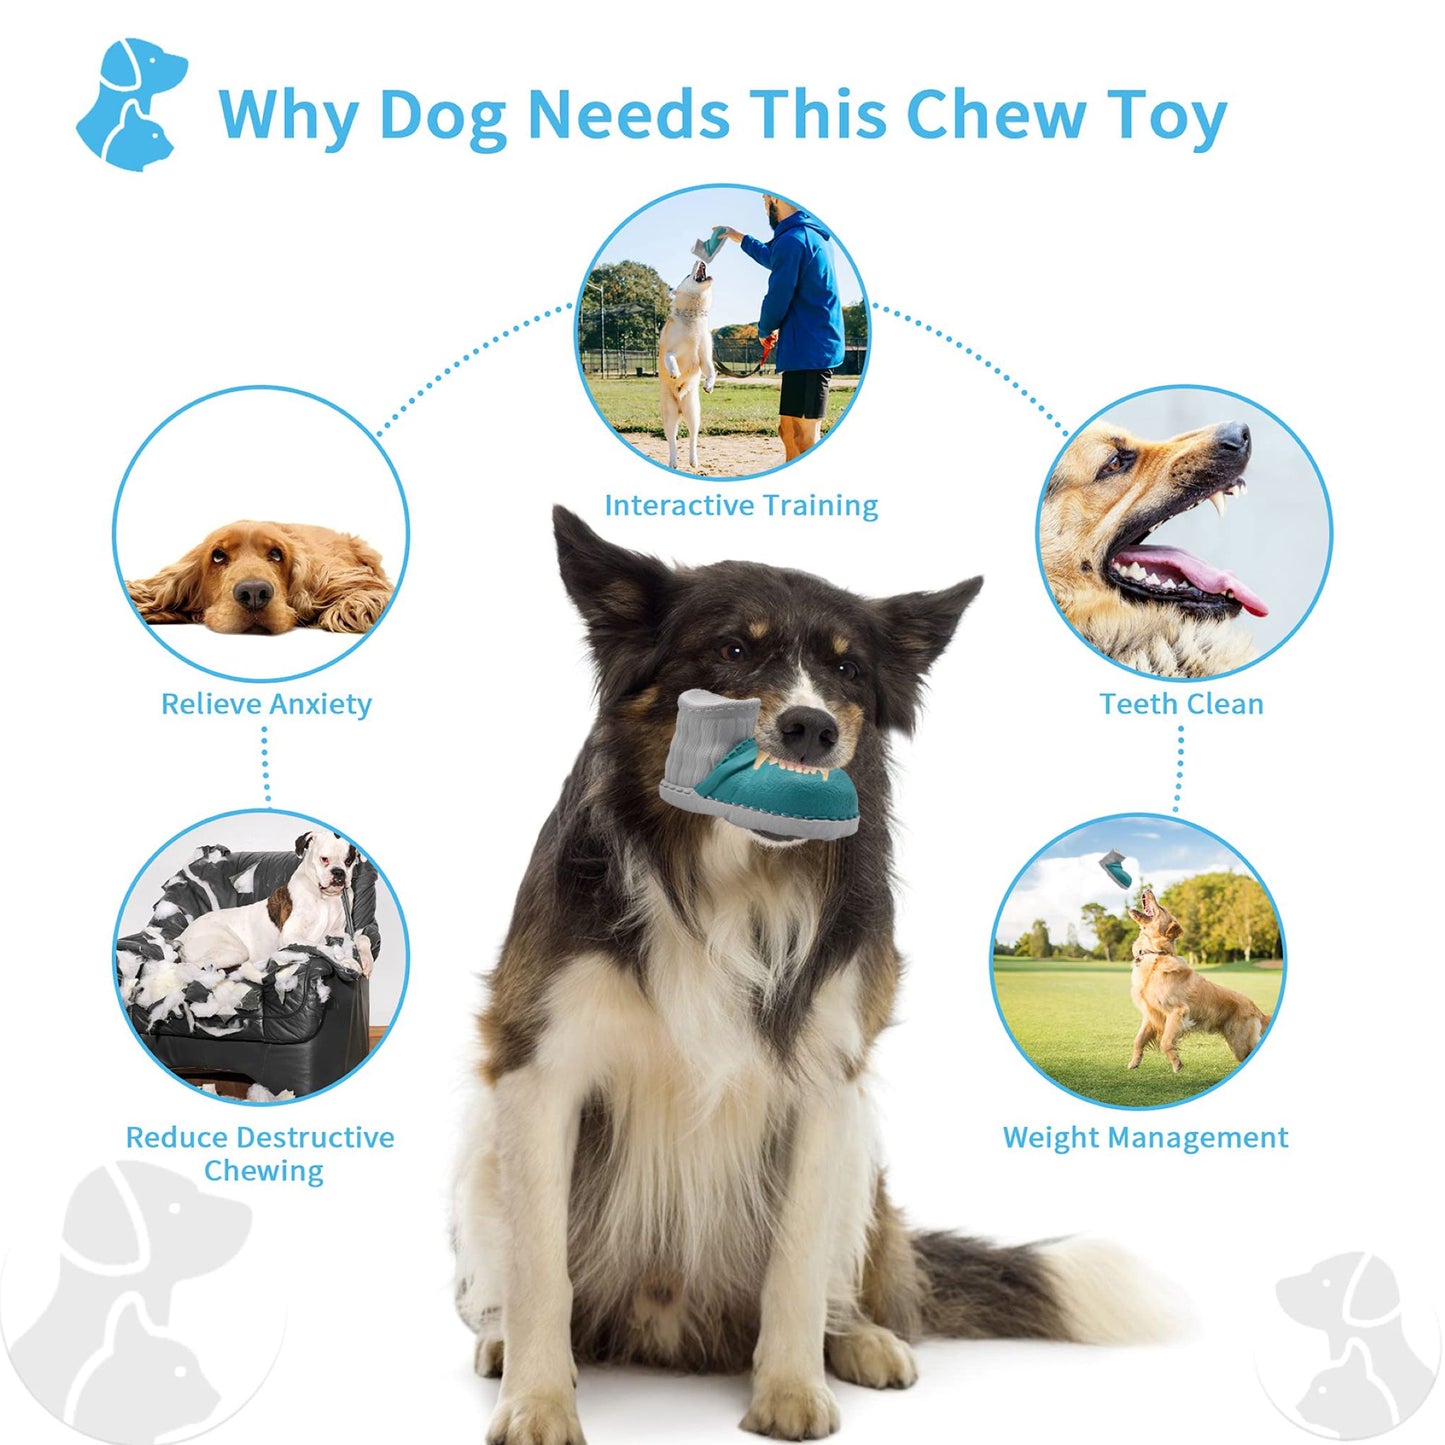 ROYAL PETS USA Indestructible, Durable & Tough Boot Dog Chew Toy for Aggressive Chewers. Slow Treat Dispensing Interactive Toys for S, M & L - 100% NATURAL RUBBER -10000 BITES TESTED - UNIQUE DESIGN FOR ORAL CARE